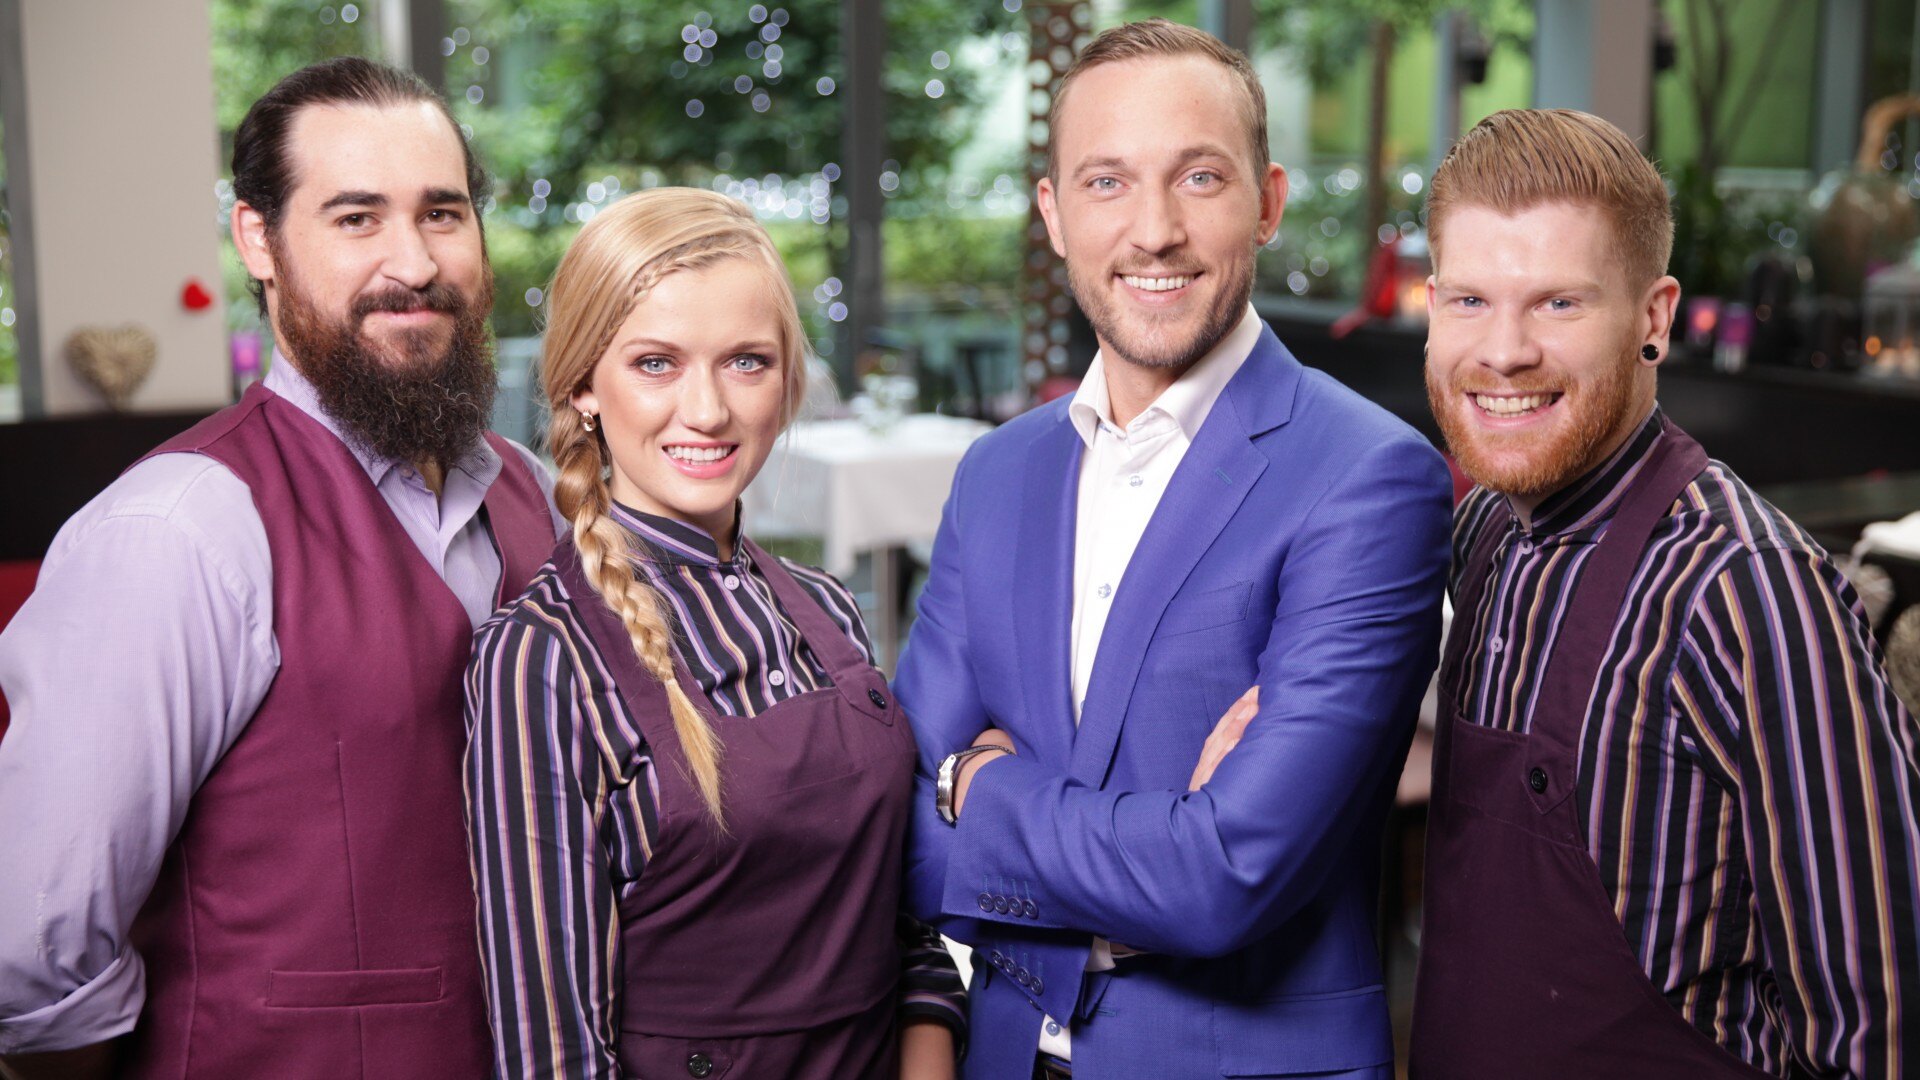 First Dates Ireland Countdown How Many Days Until The Next Episode